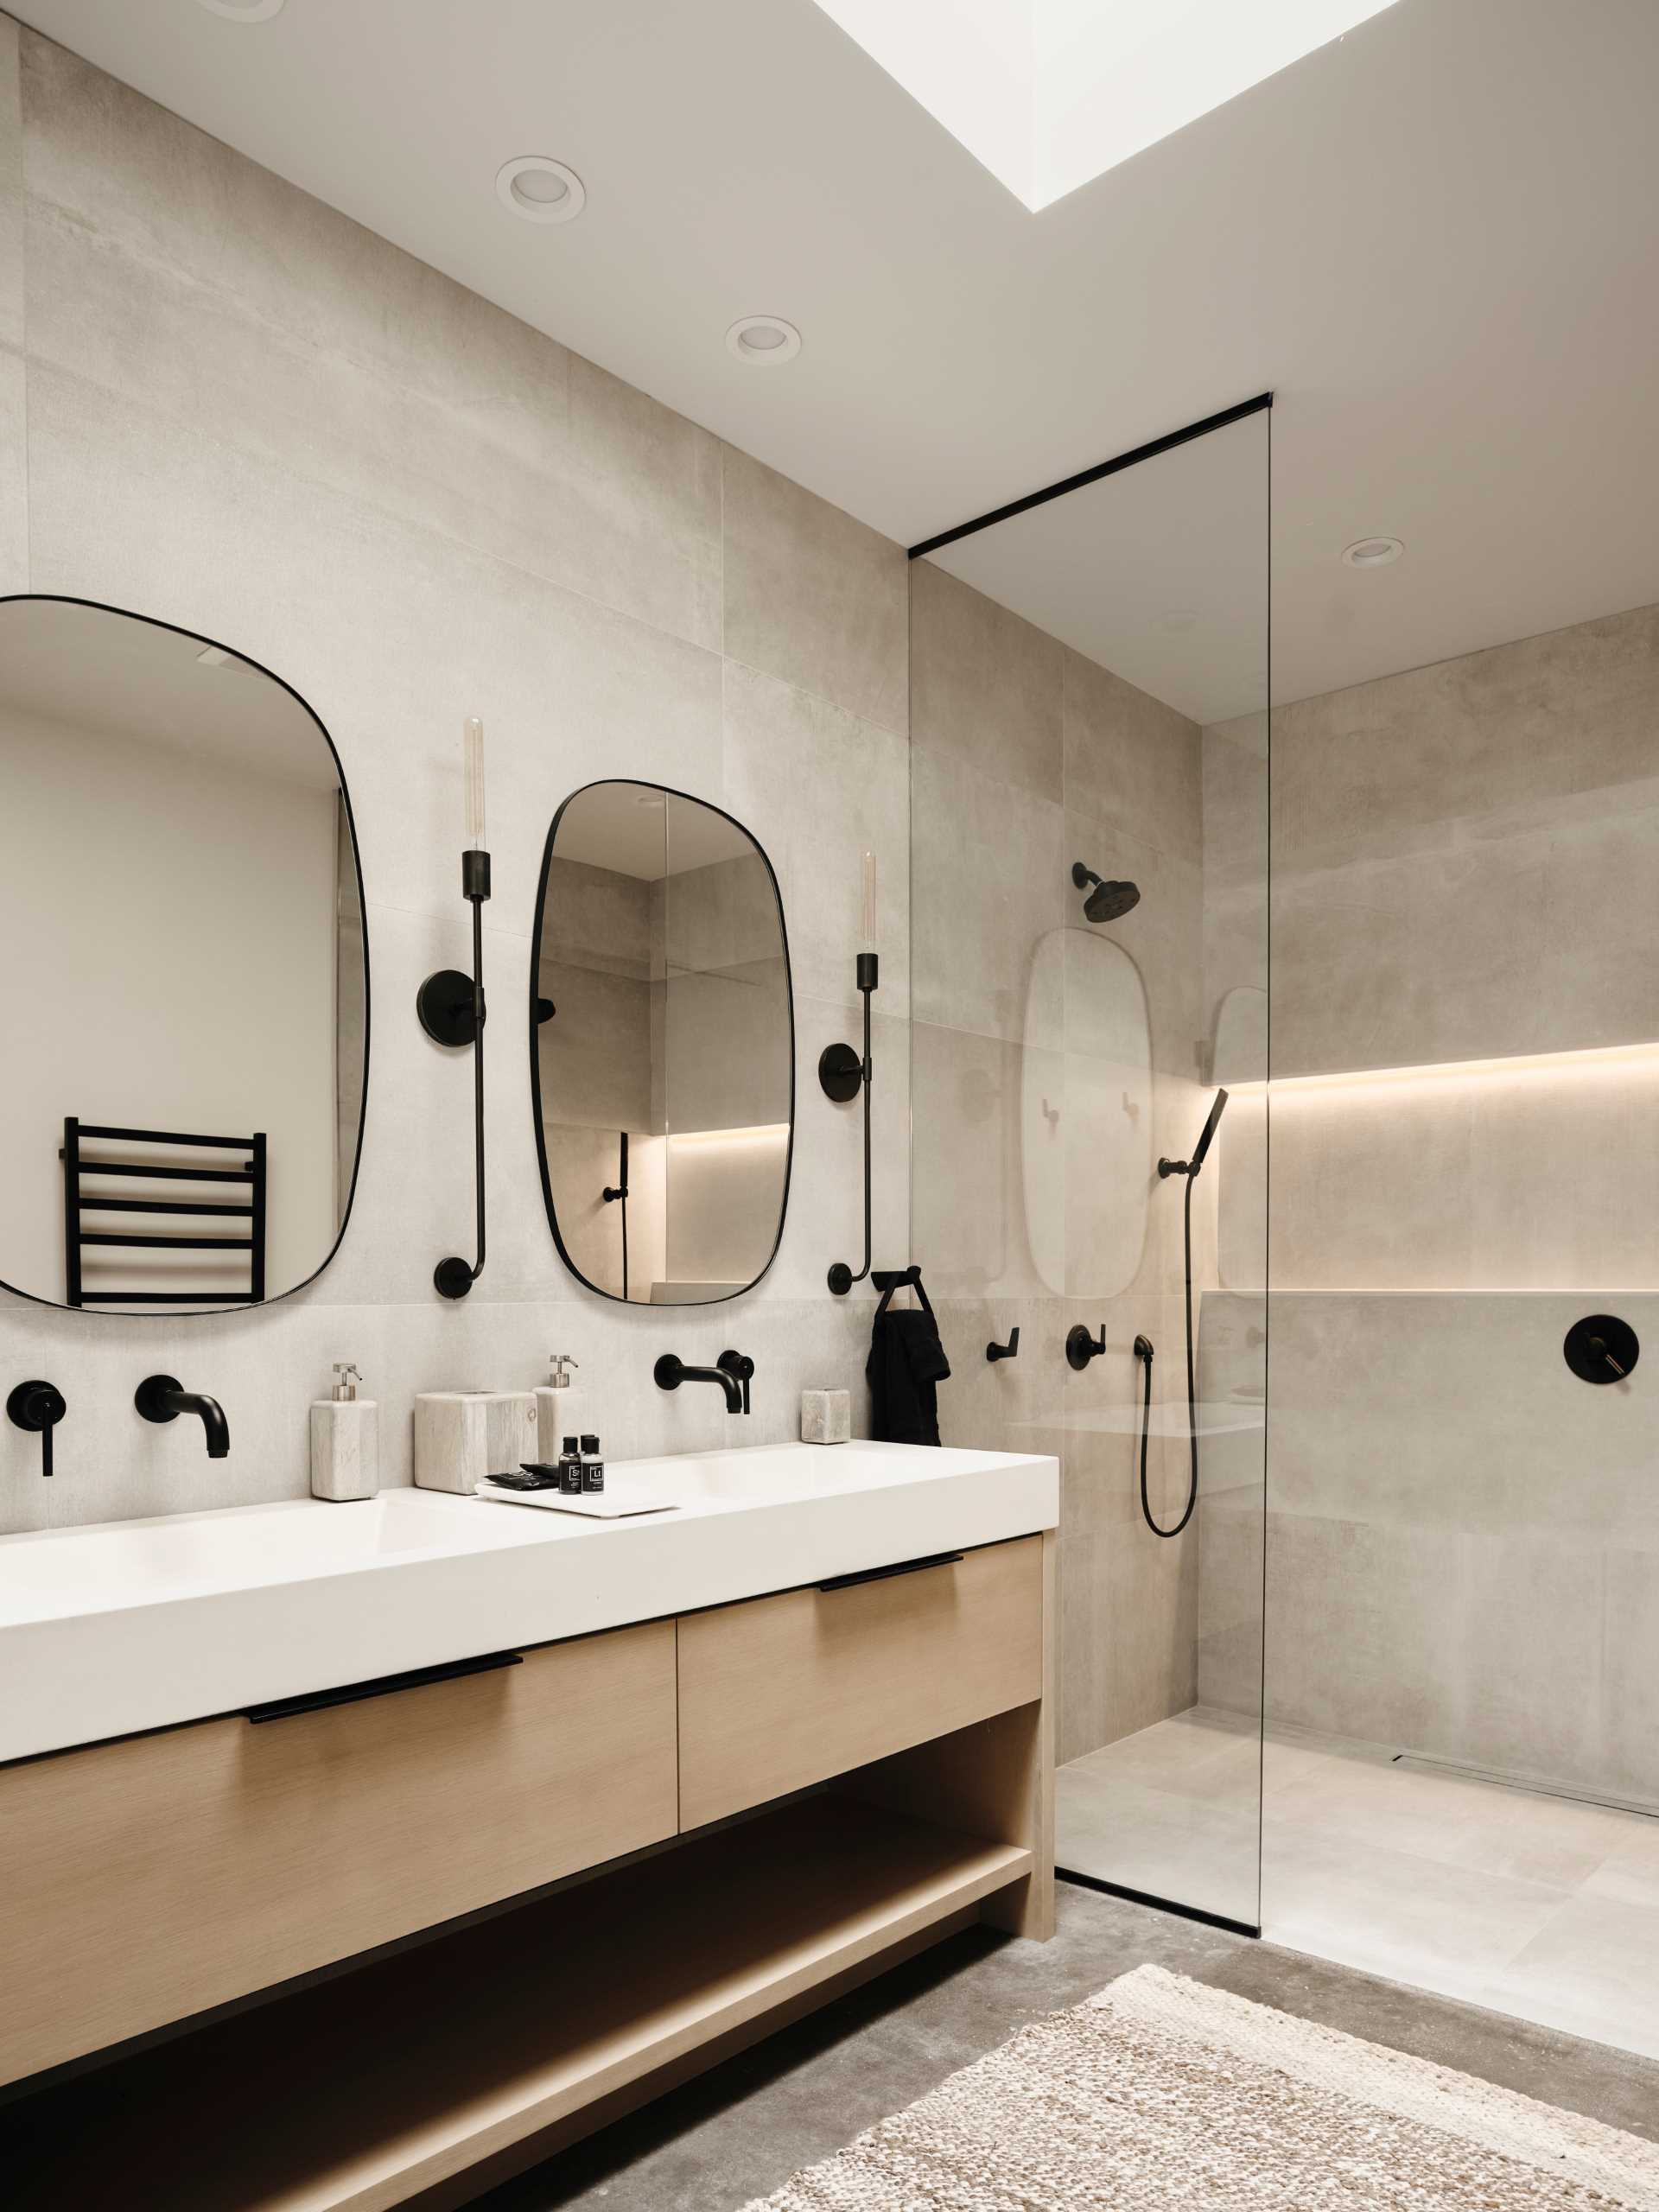 A bathroom with a neutral color palette with black accents and a skylight.